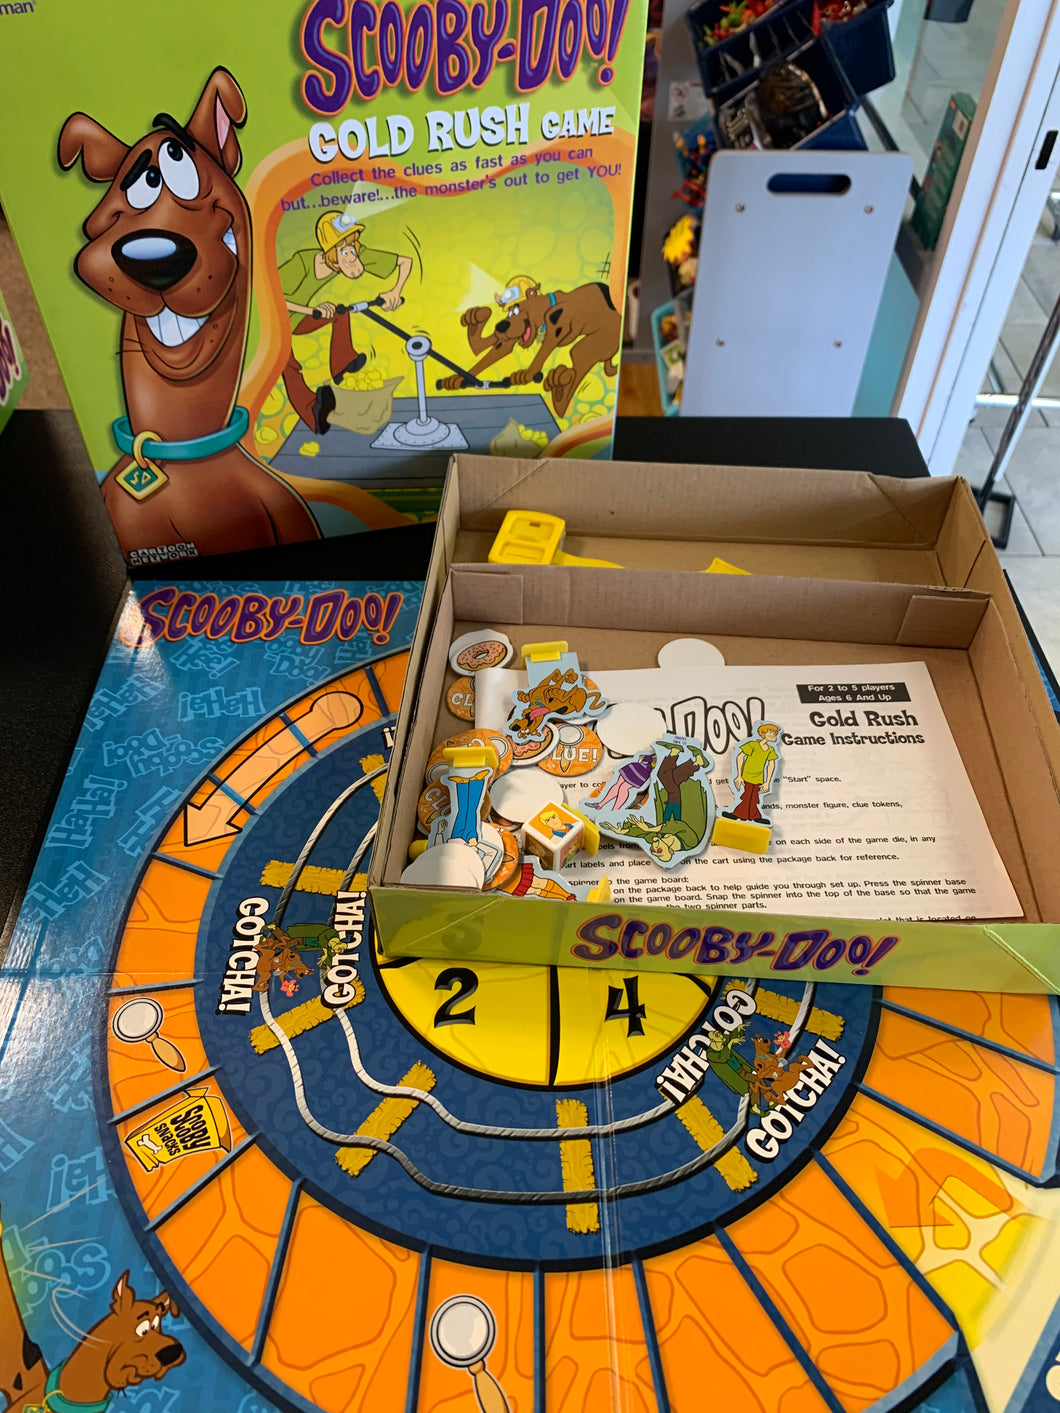 PRESSMAN SCOOBY-DOO GOLD RUSH GAME PREOWNED